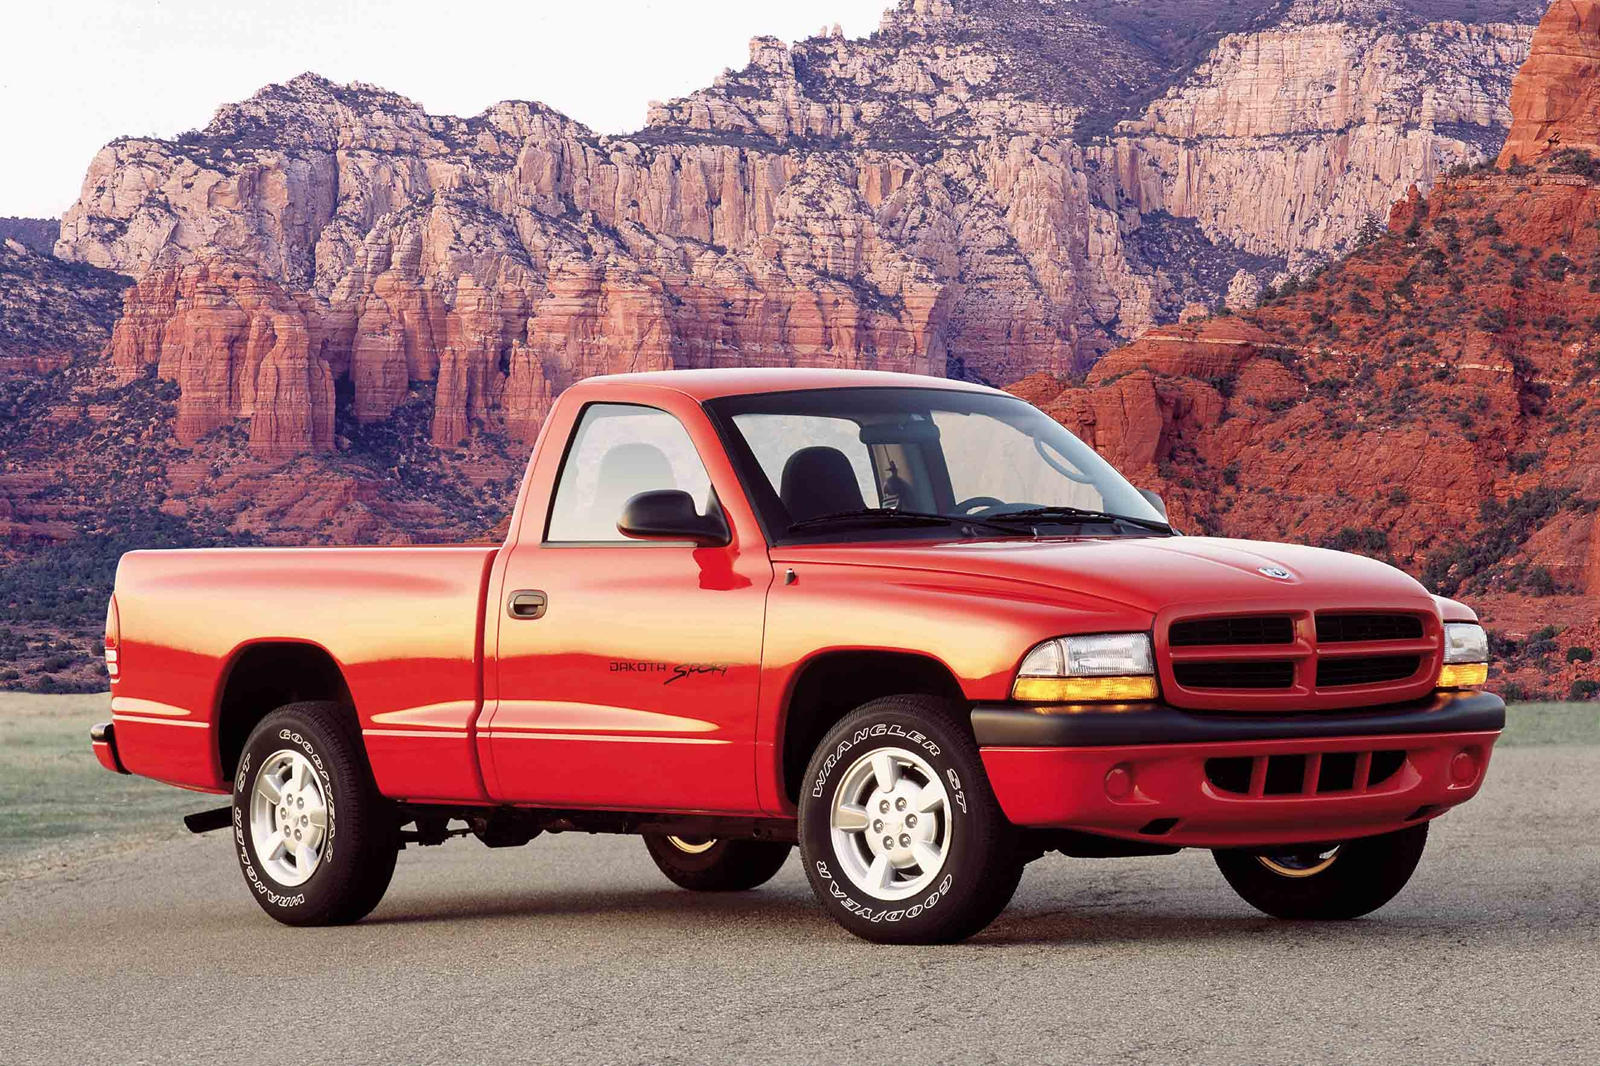 Dodge Dakota 2nd Generation (DN) - What To Check Before You Buy